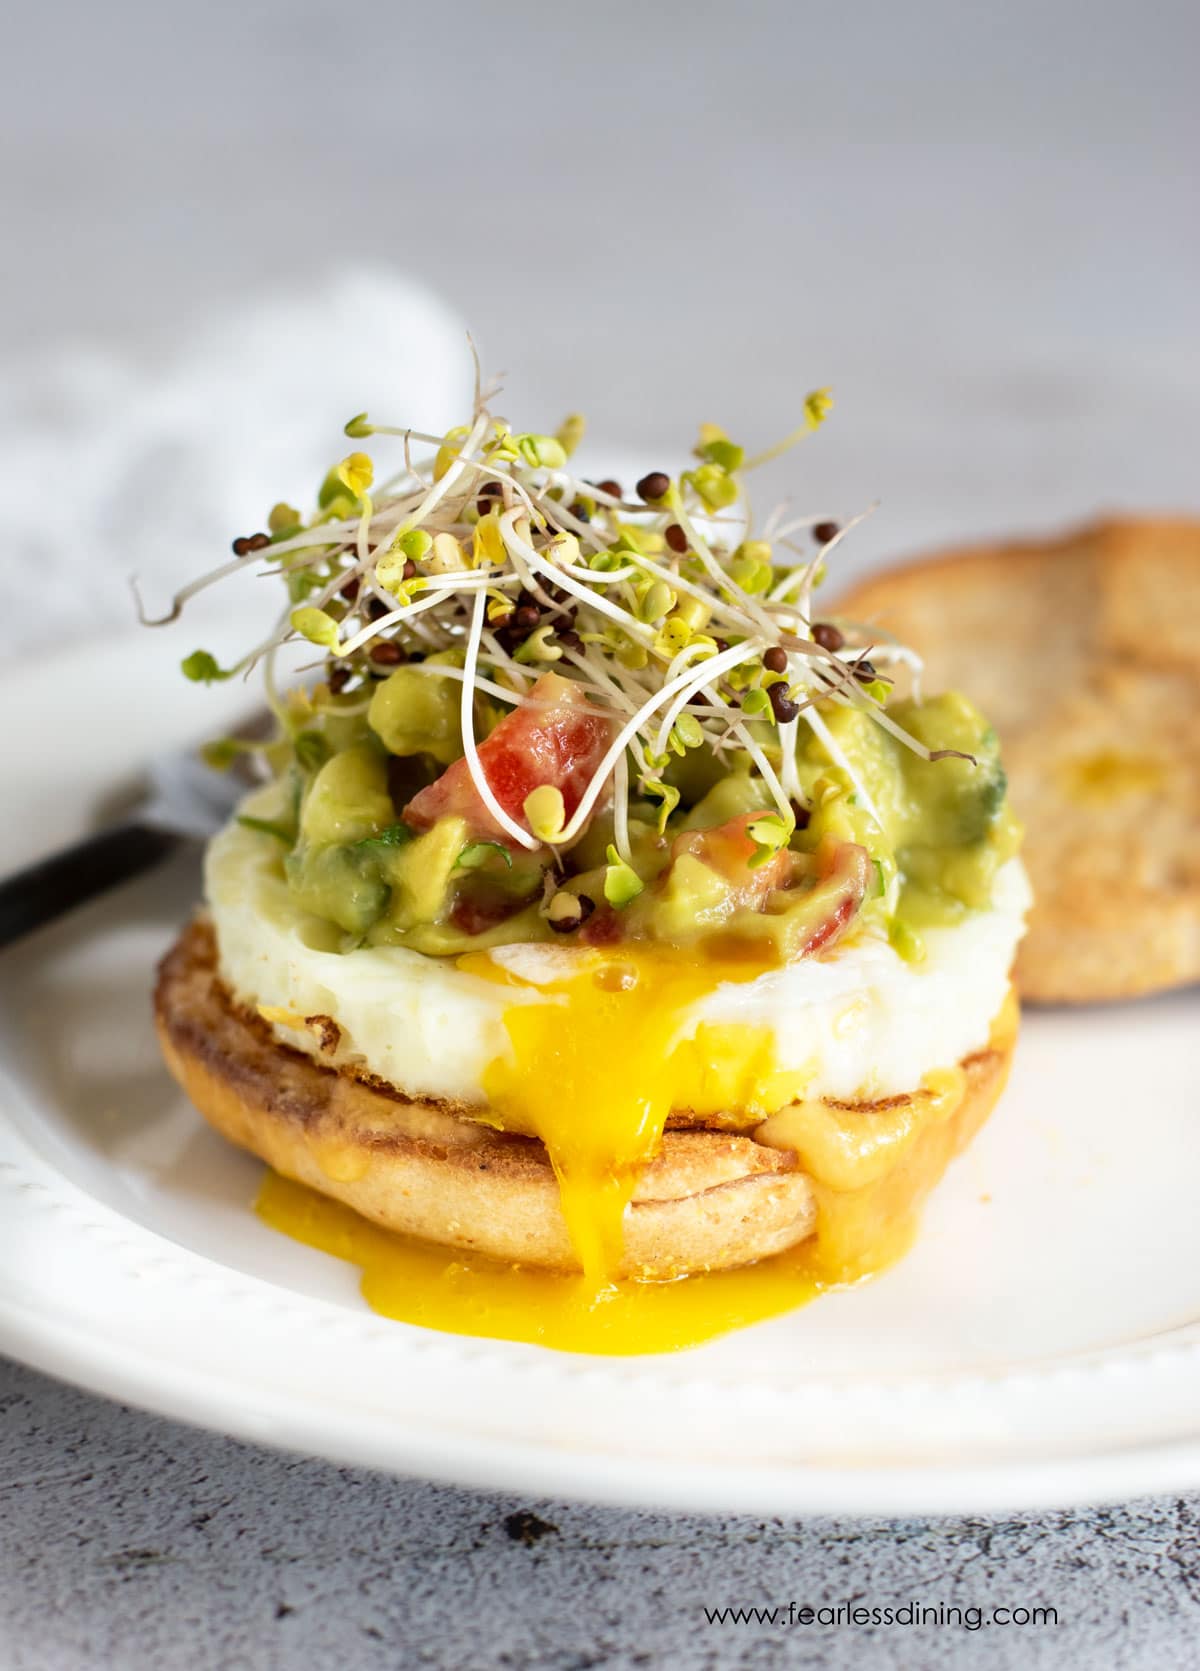 A gluten free breakfast sandwich topped with homemade guacamole and sprouts on a white plate.